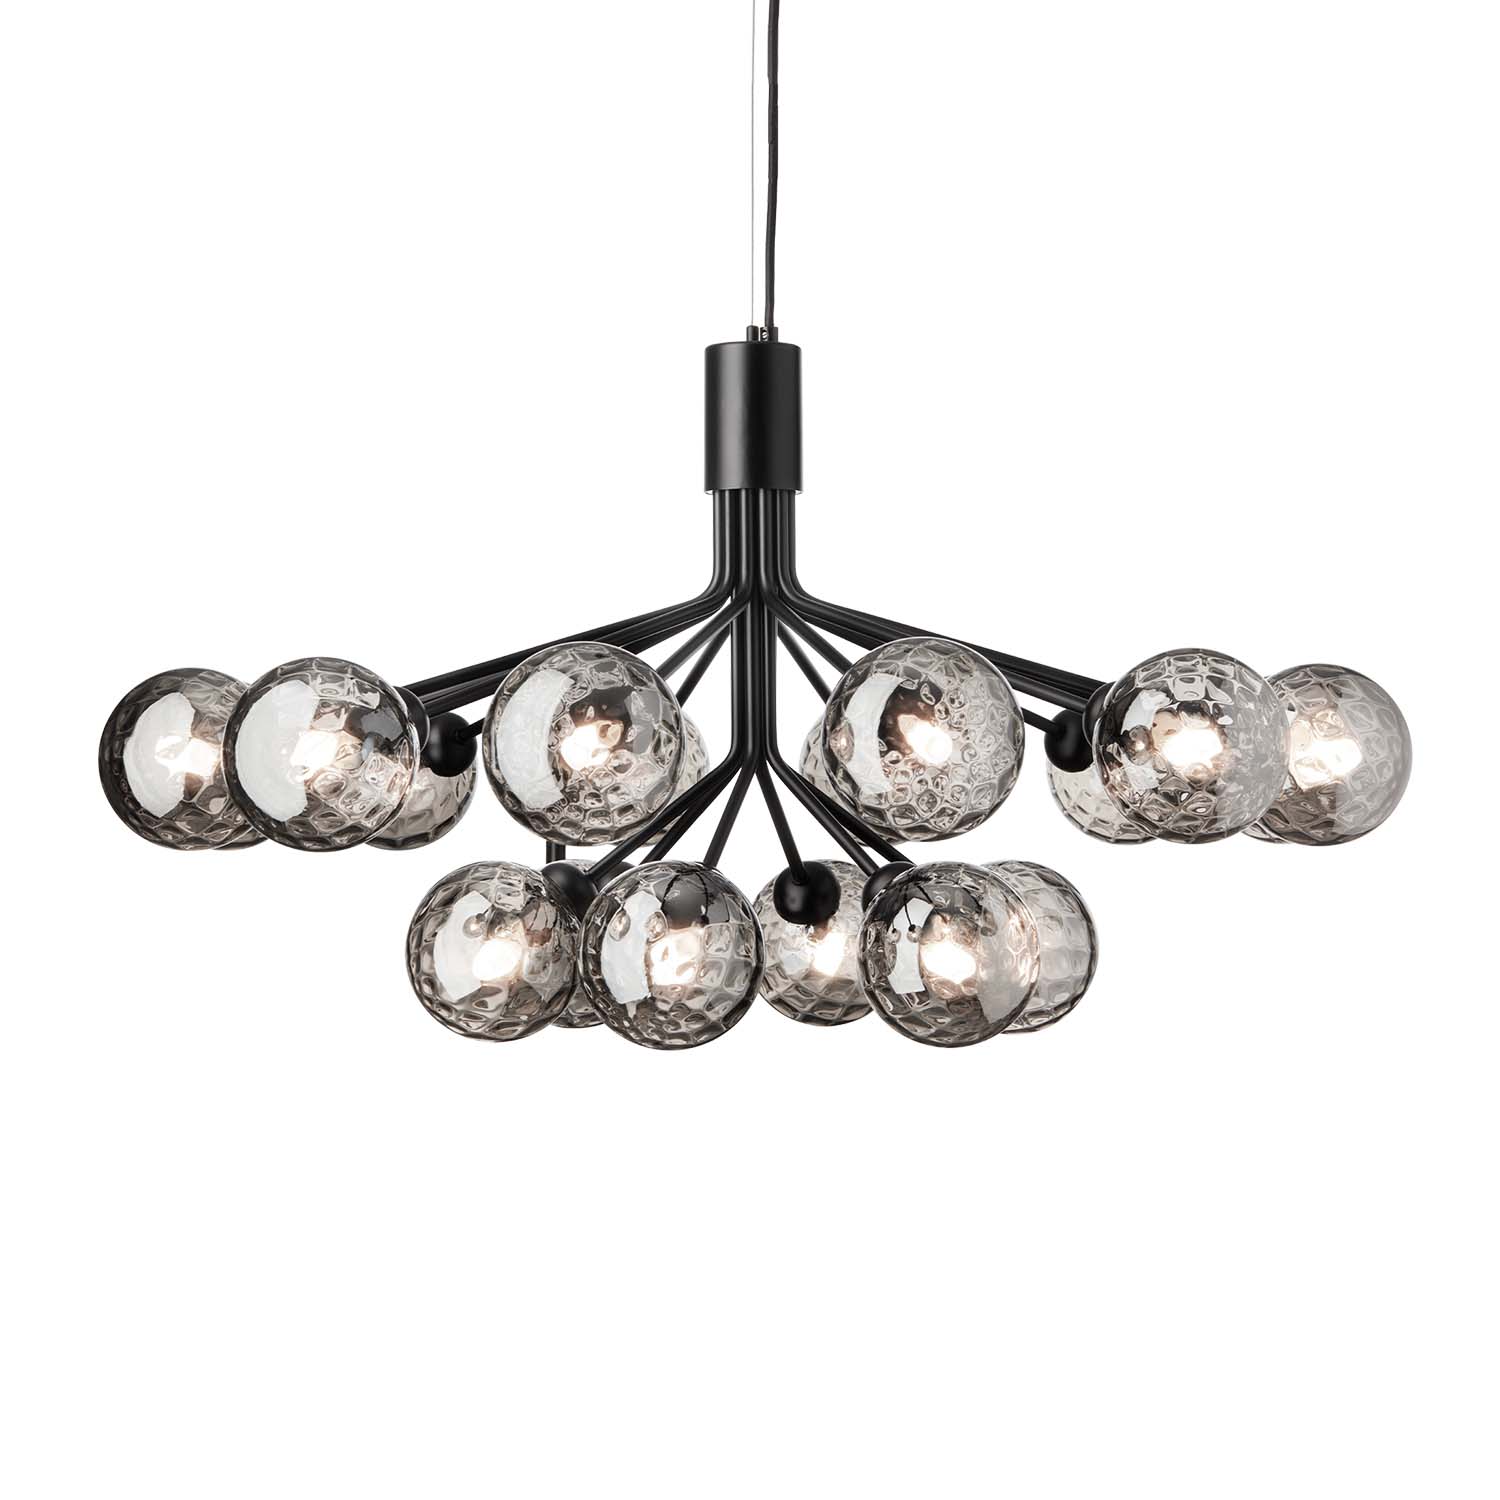 APIALES Optic - Black or gold chandelier with glass globes